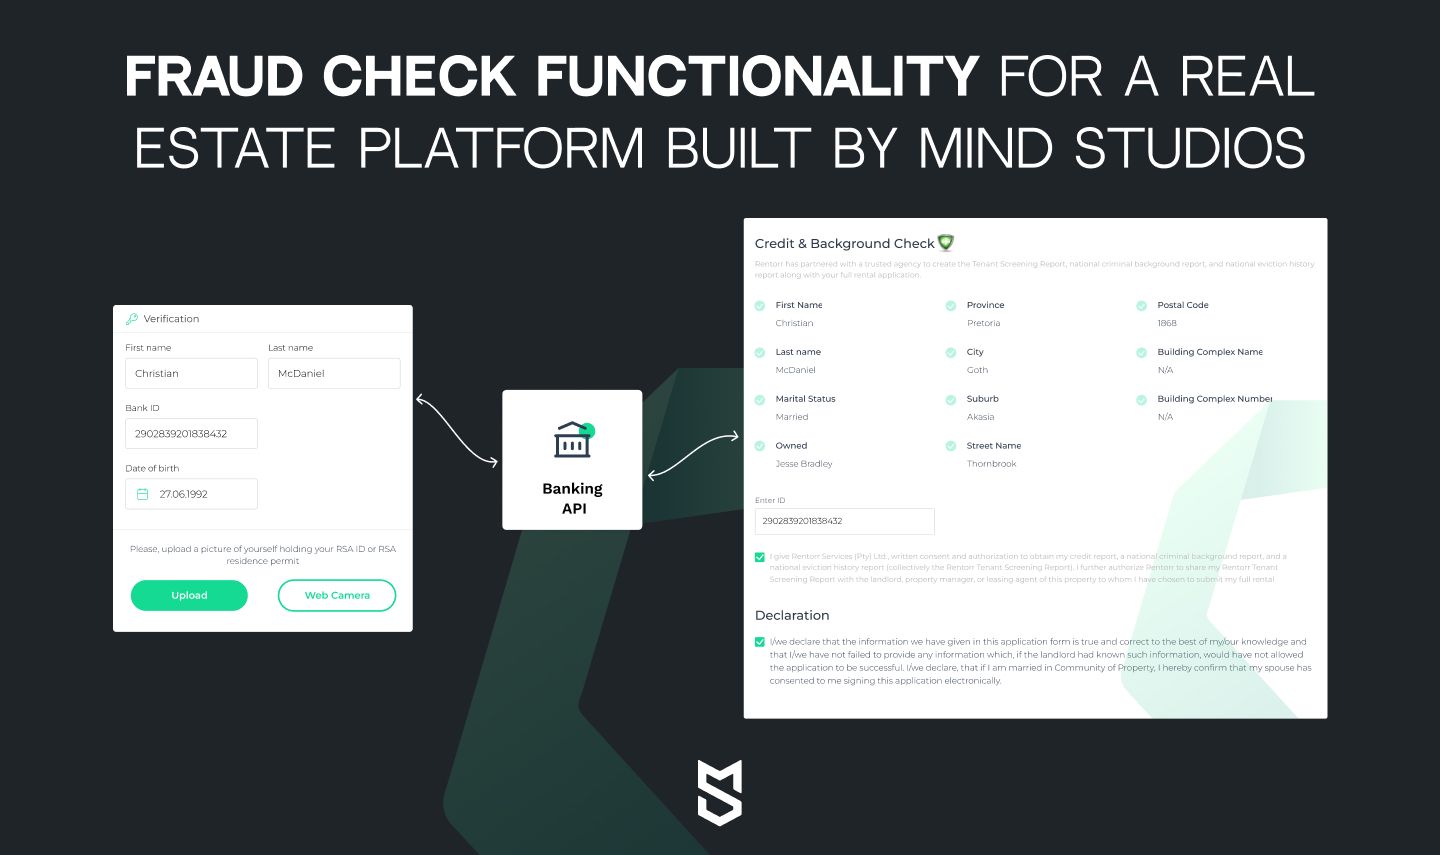 Fraud check functionality for a real estate platform built by Mind Studios